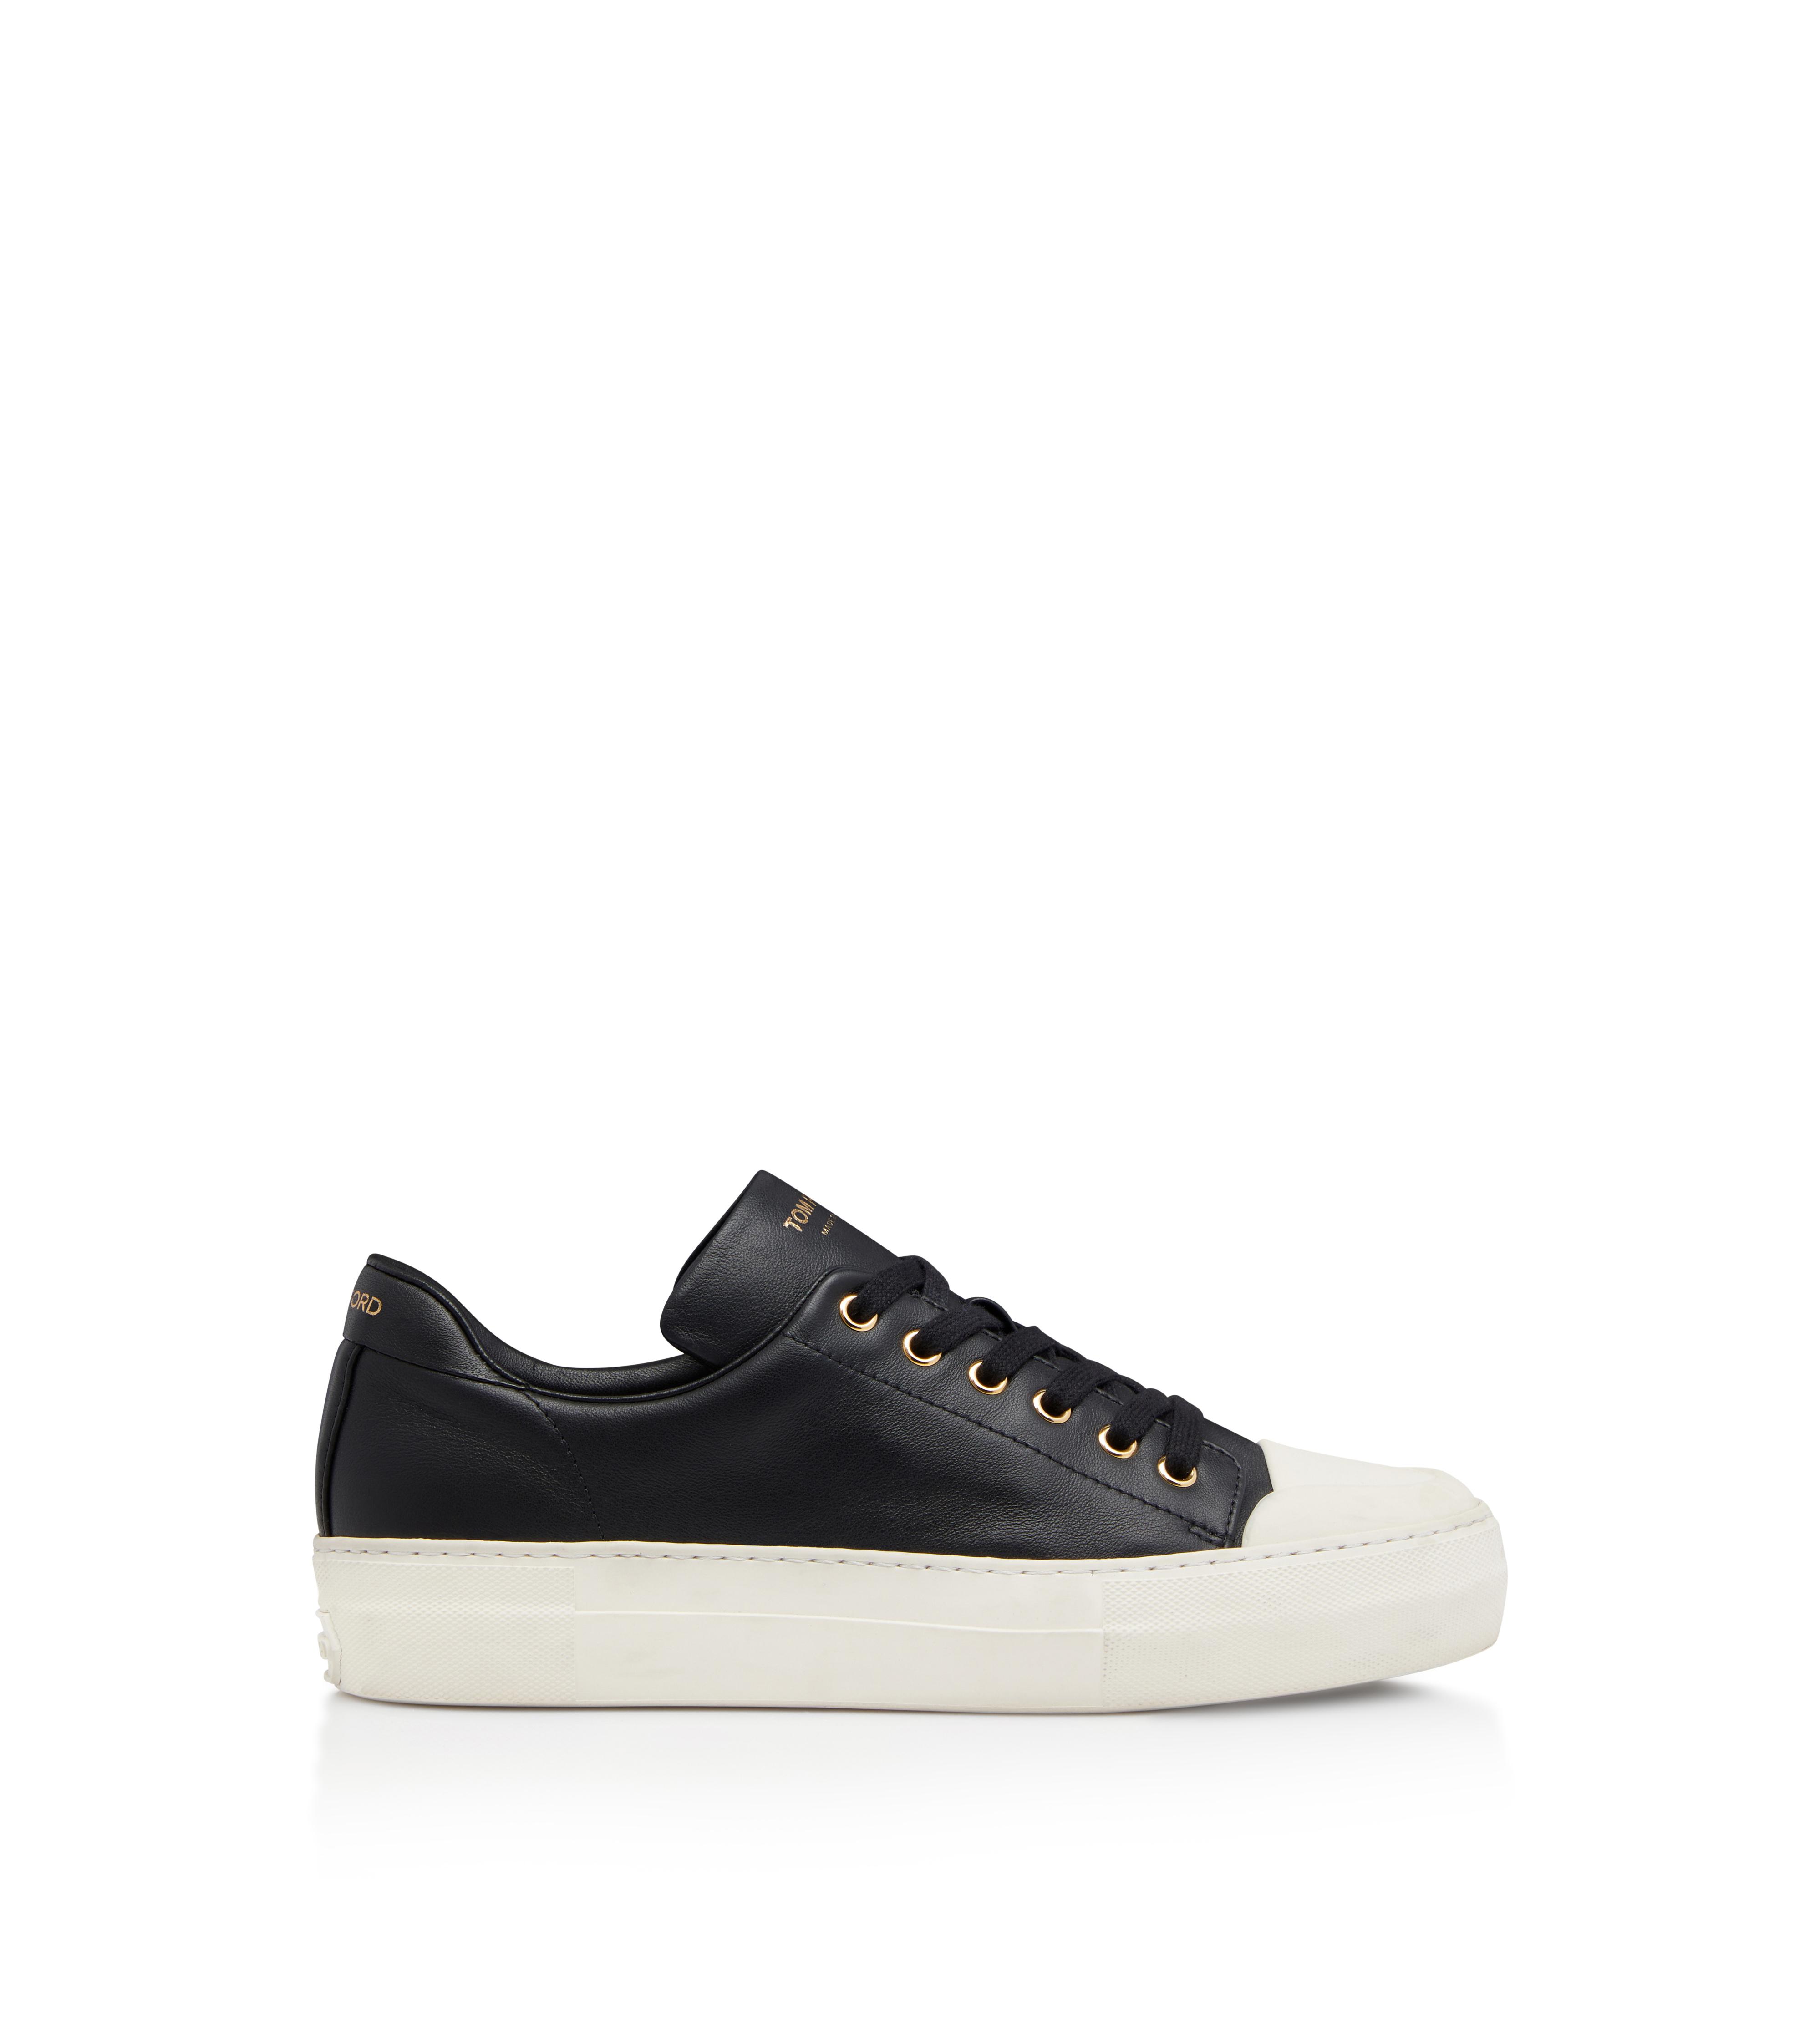 Sneakers - Women's Shoes | TomFord.com